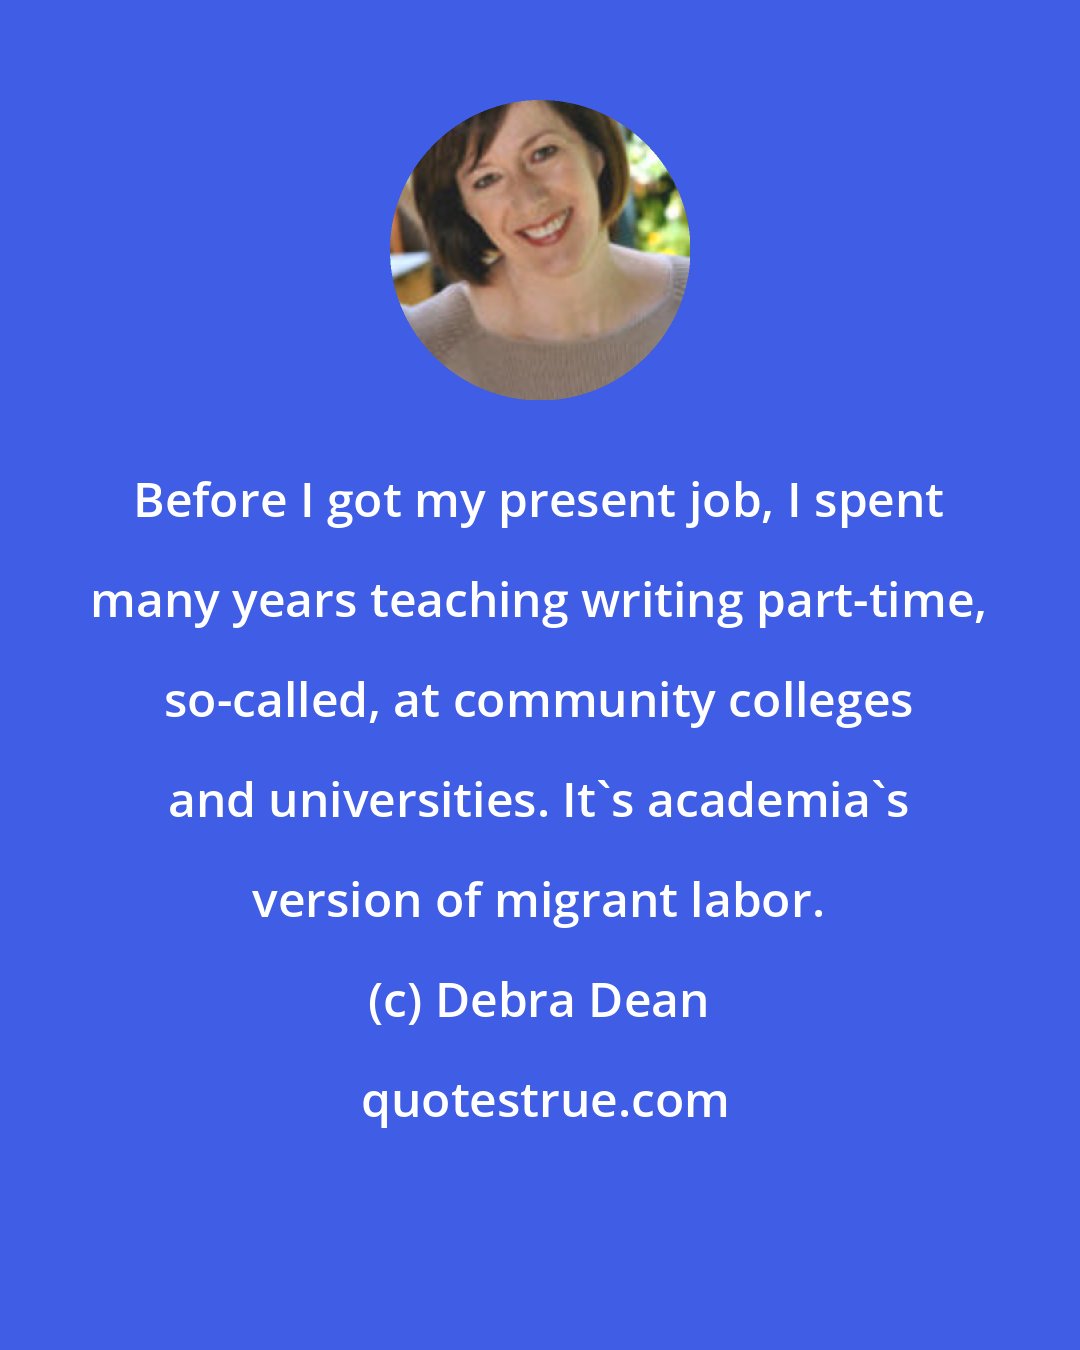 Debra Dean: Before I got my present job, I spent many years teaching writing part-time, so-called, at community colleges and universities. It's academia's version of migrant labor.